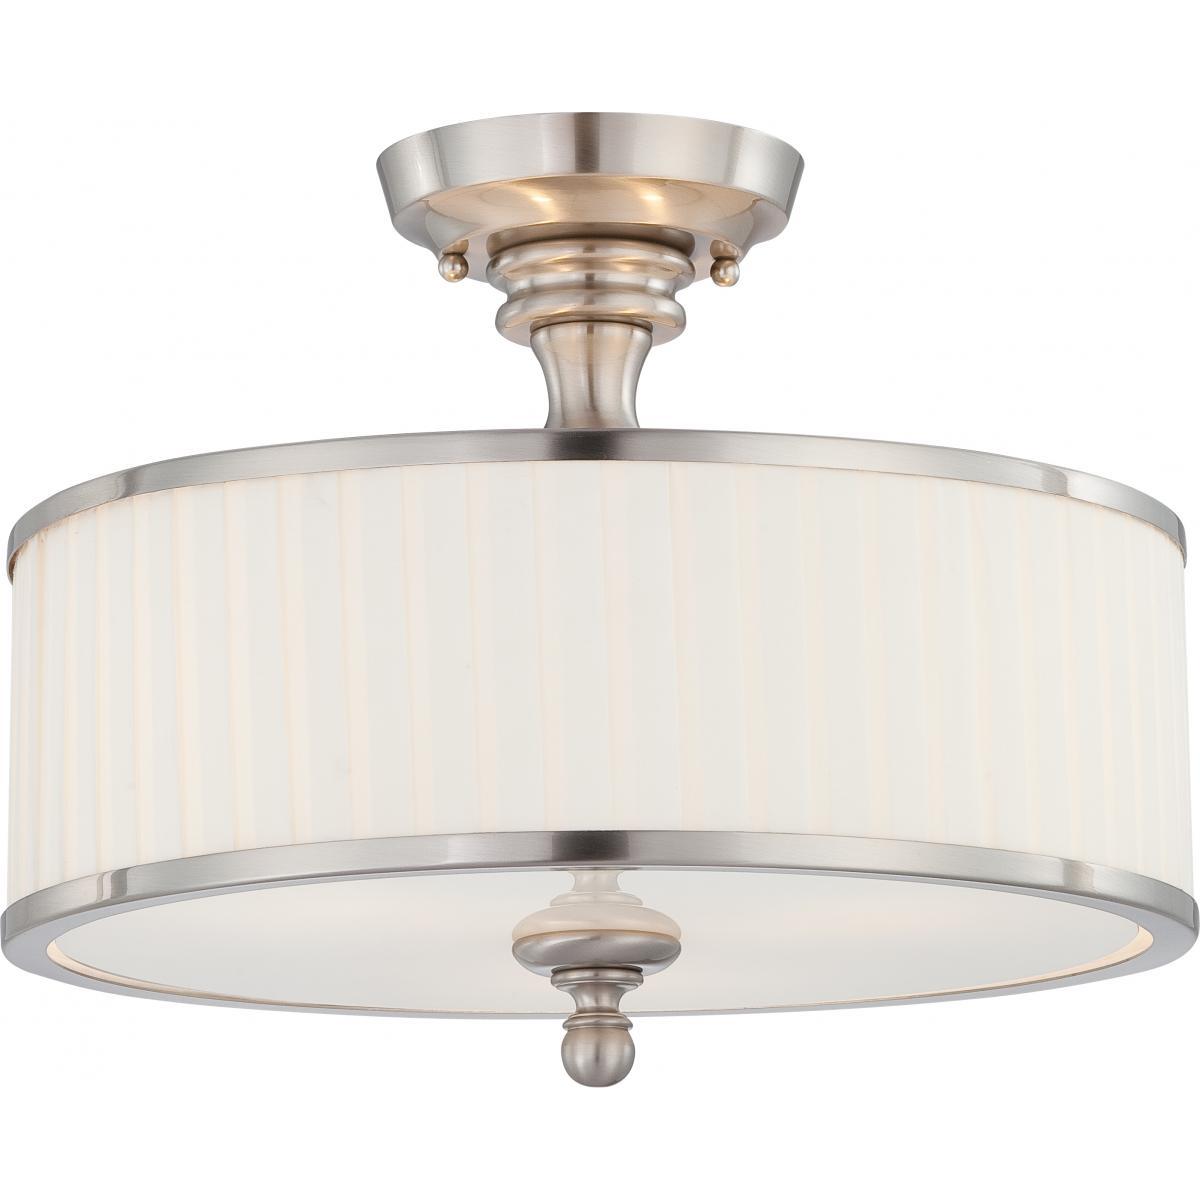 Candice 3 Light Semi Flush Fixture with Pleated White Shade Ceiling Nuvo Lighting 